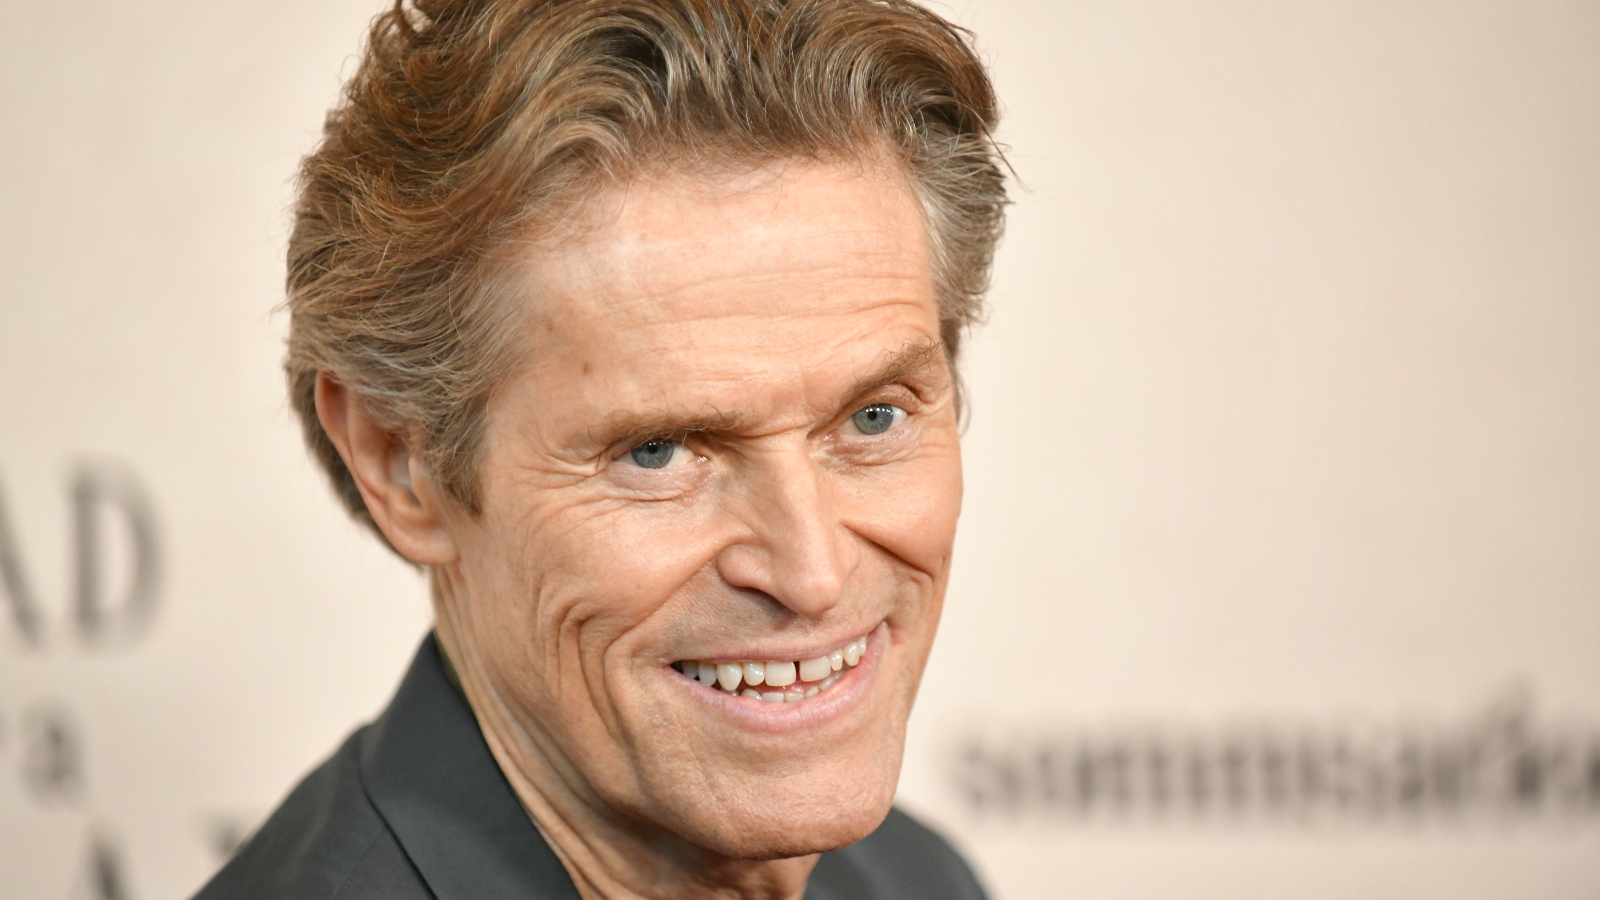 DC fans demand Willem Dafoe join ‘The Batman’ universe, but not how you might think